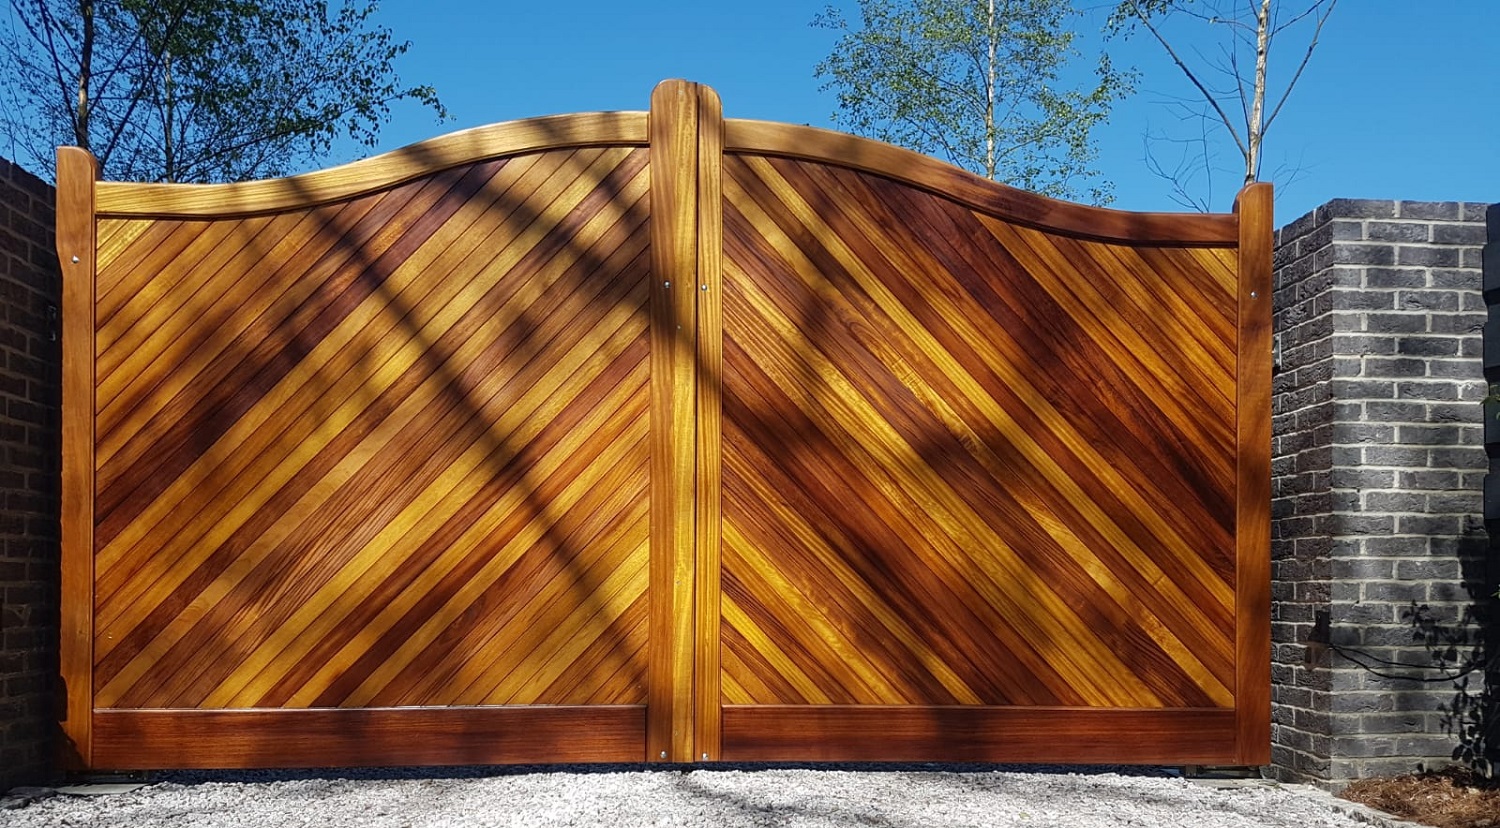 Iroko arched top driveway gates with diagonal infill boards